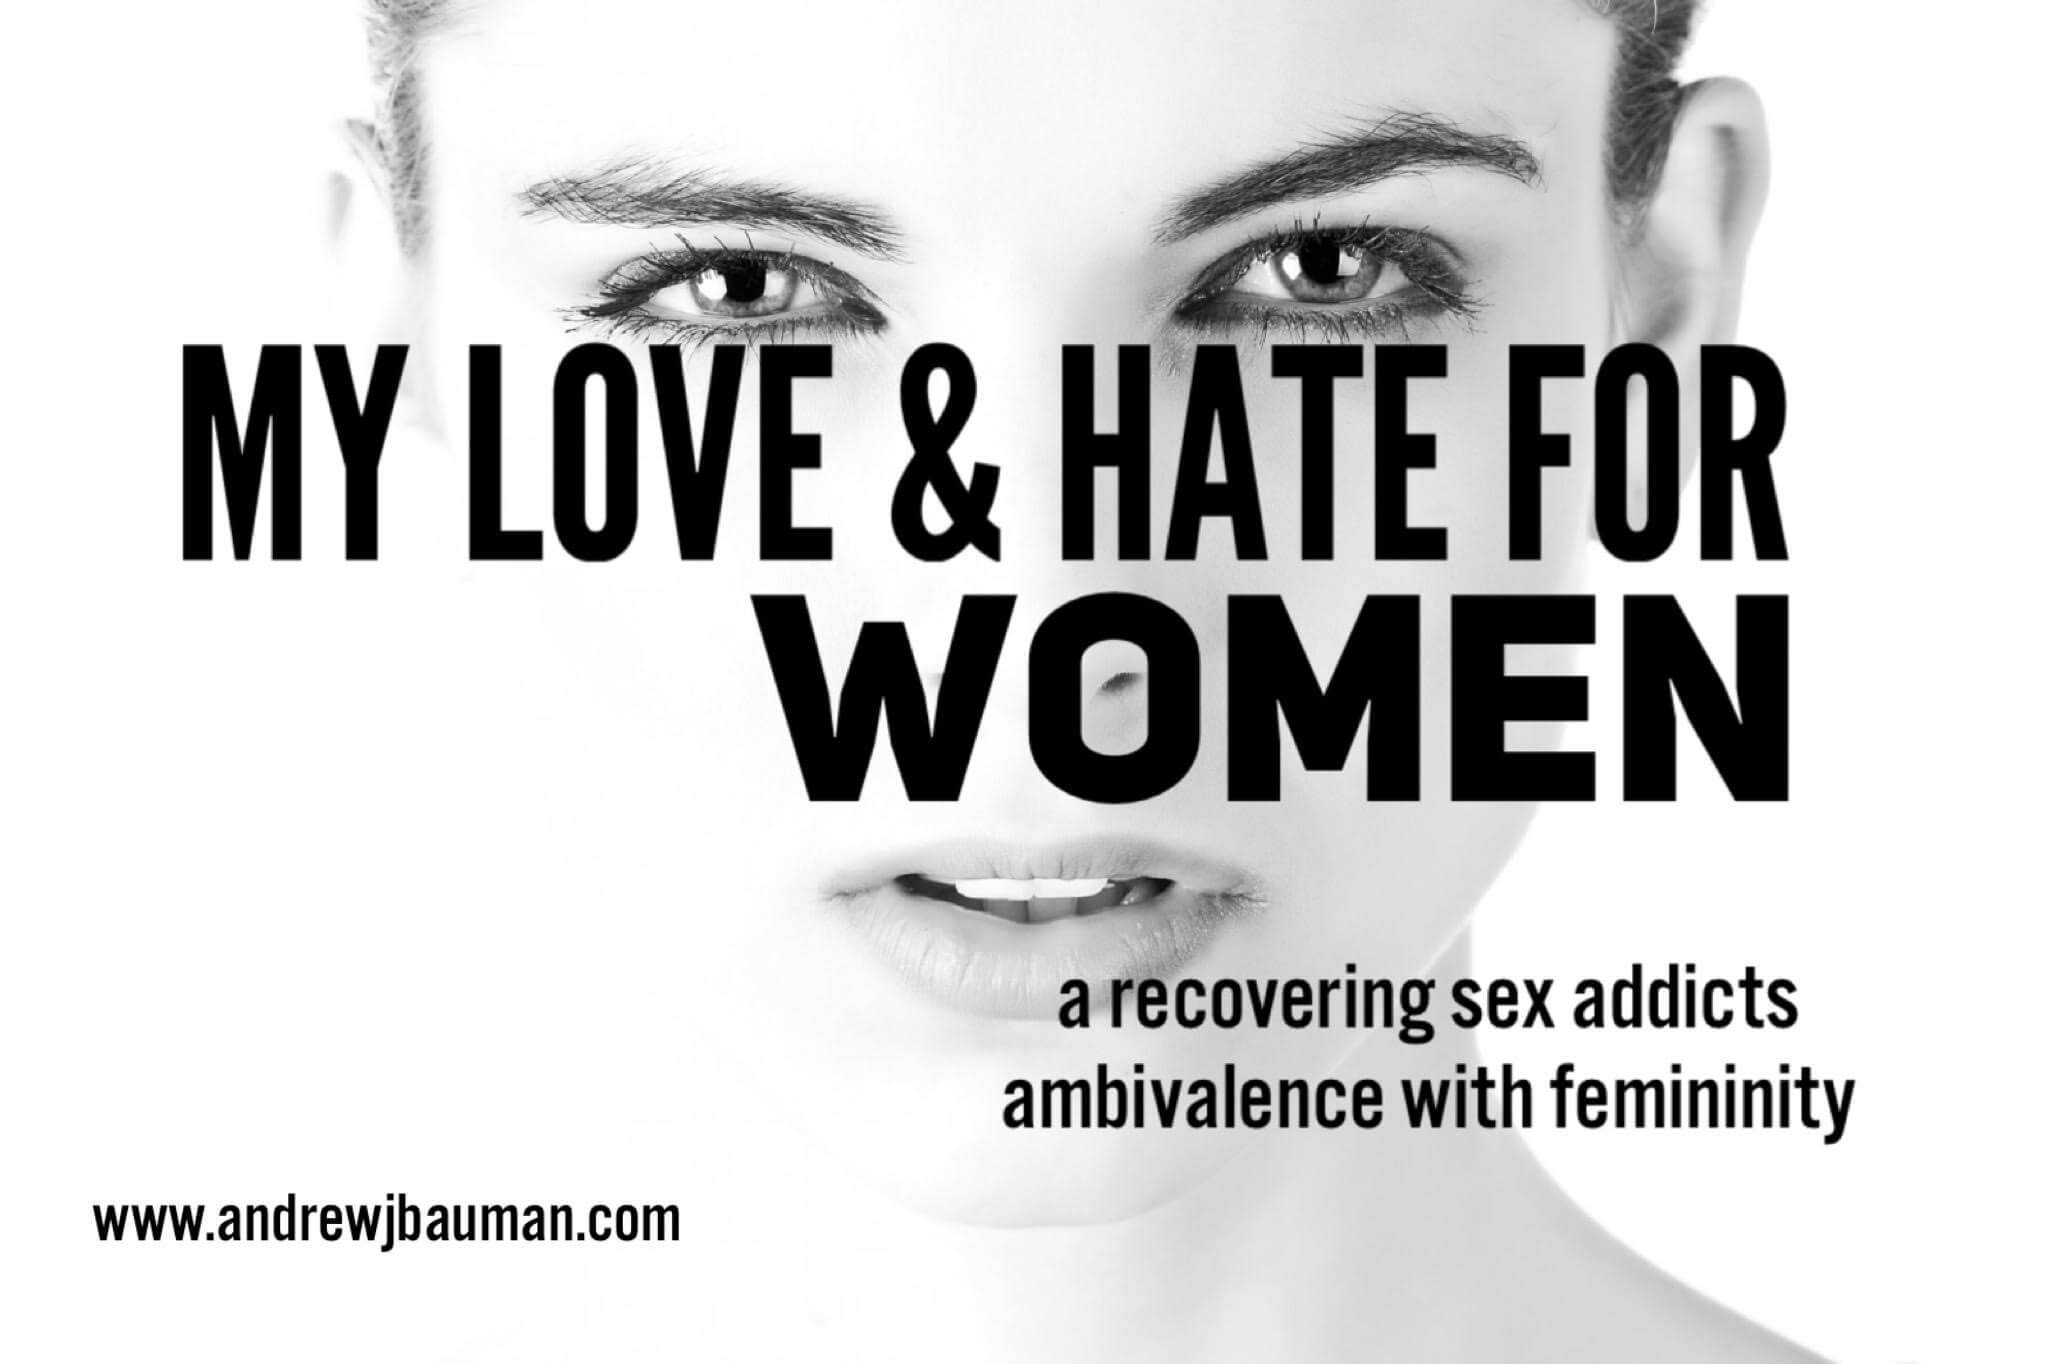 My Love and Hate for Women a recovering sex addicts ambivalence with femininity image